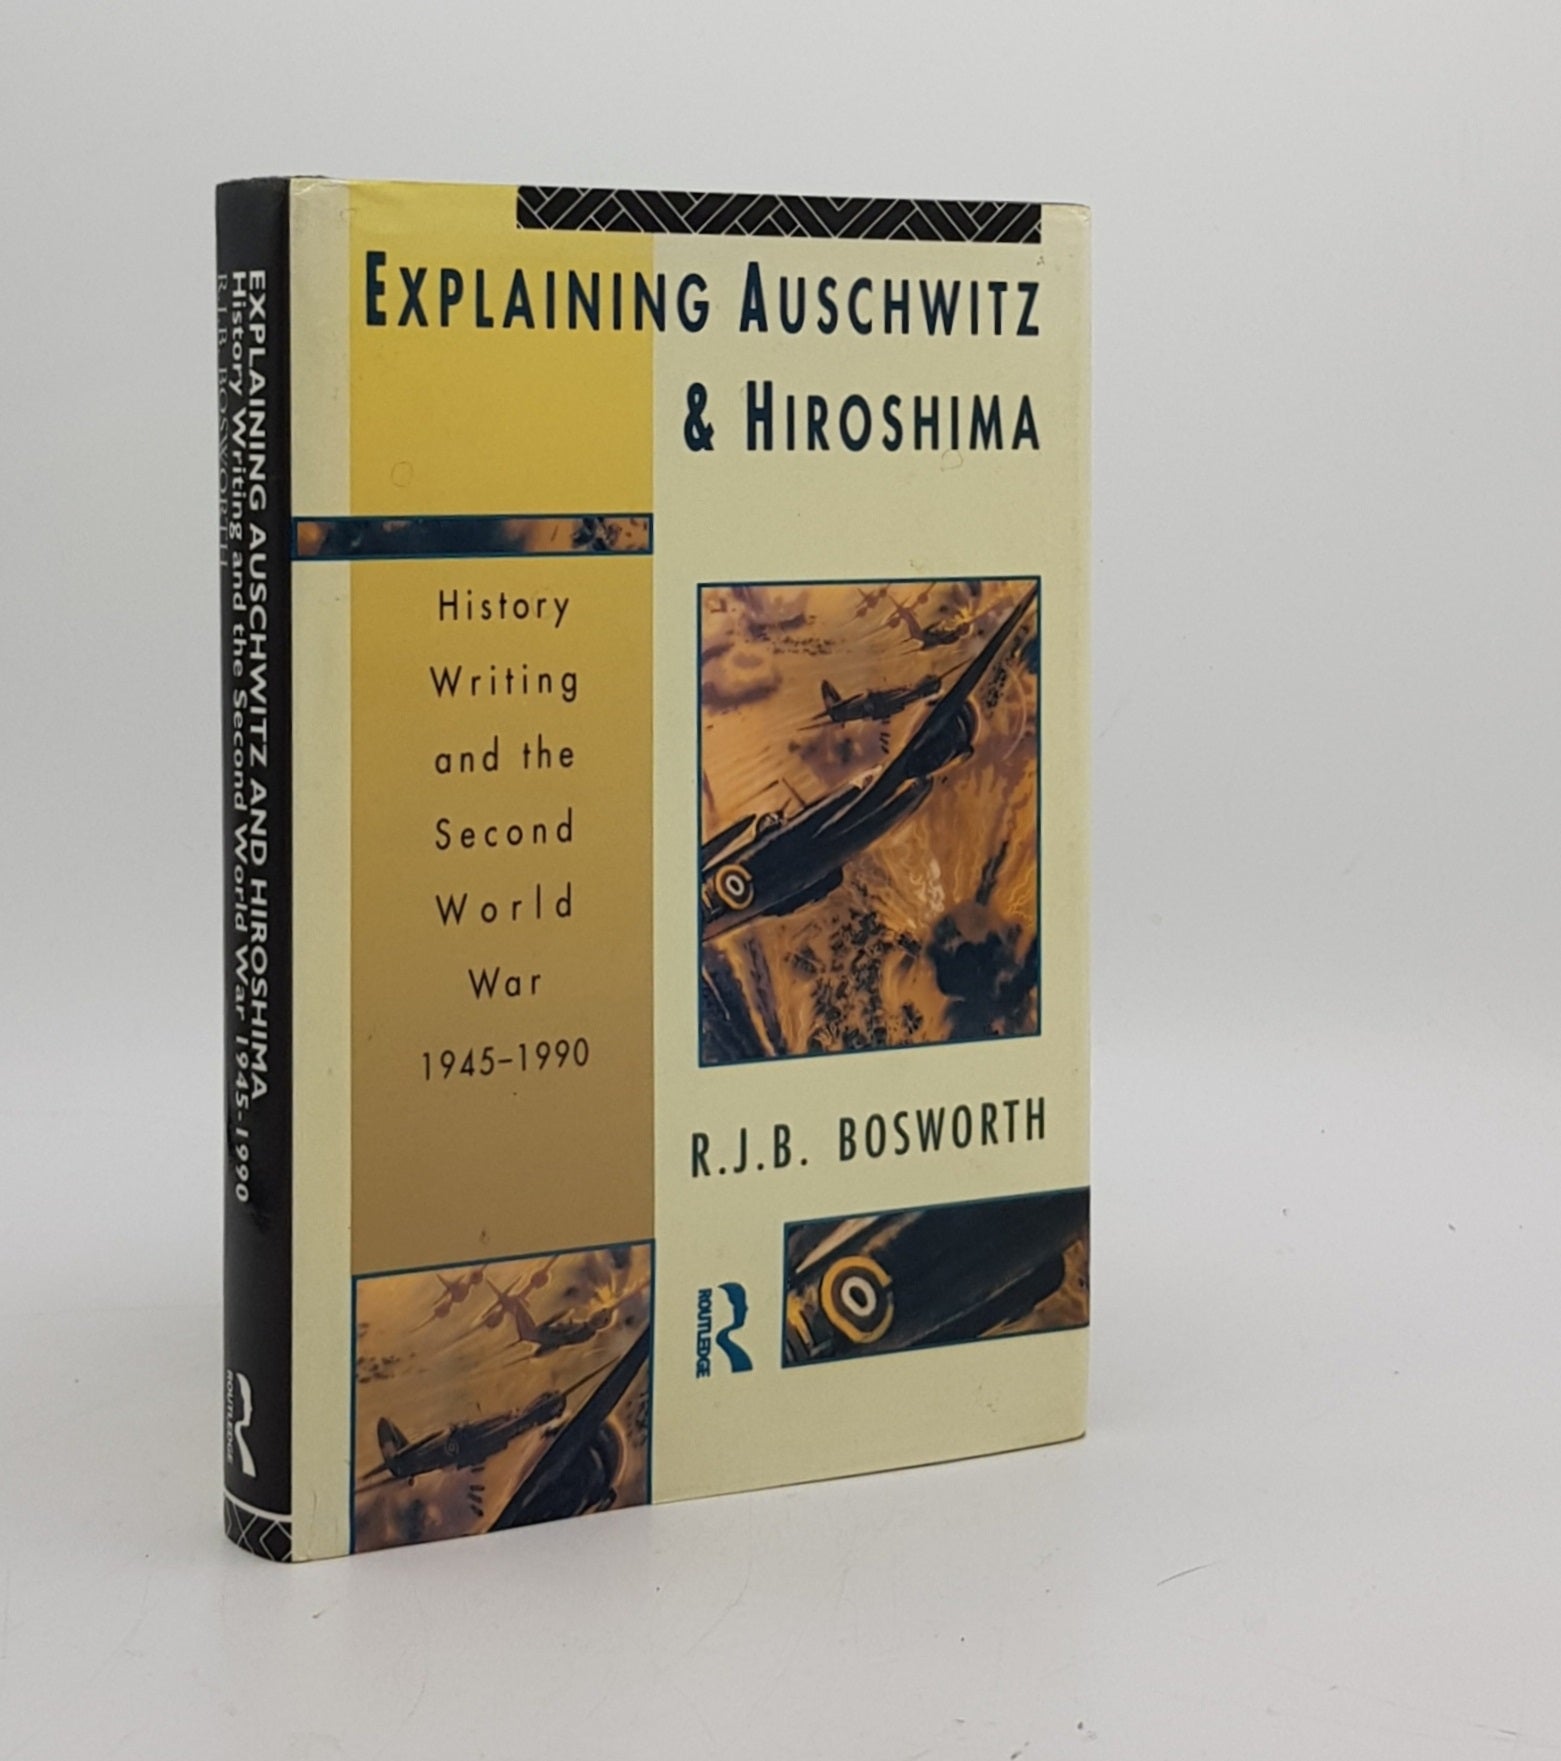 BOSWORTH R.J.B. - Explaining Auschwitz and Hiroshima History Writing and the Second World War 1945-1990